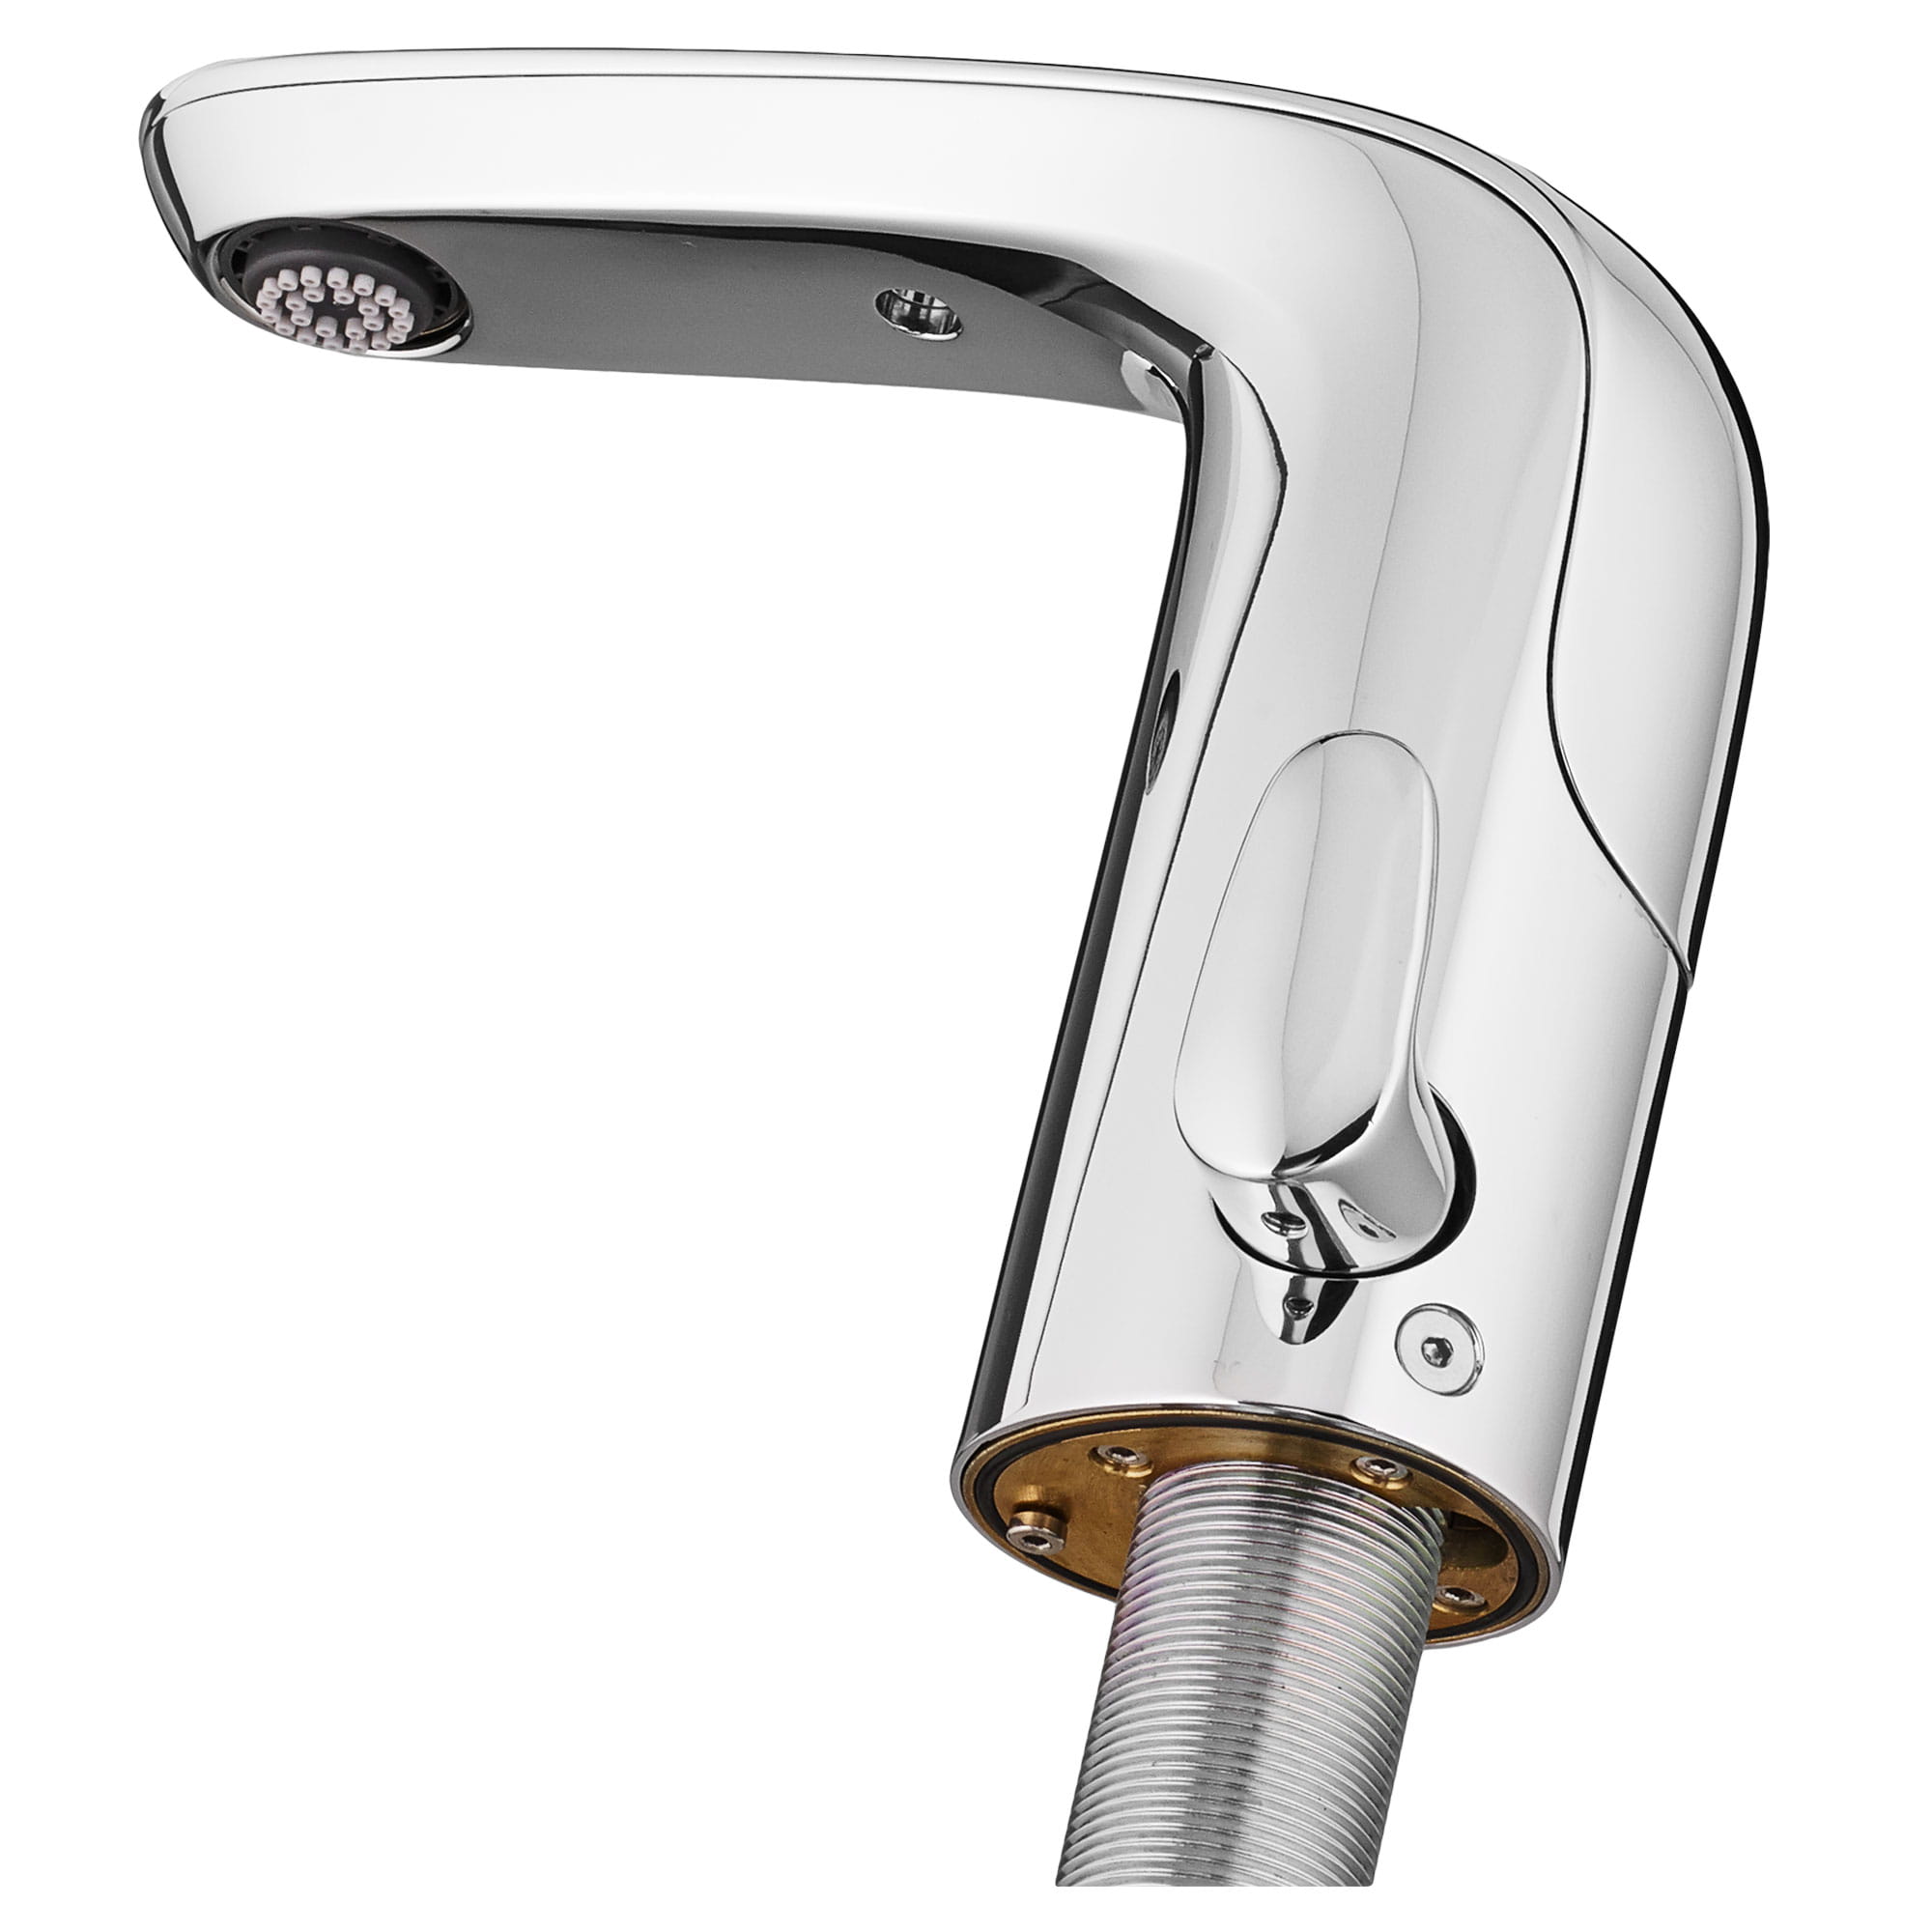 NextGen™ Selectronic® Touchless Faucet, Battery-Powered With Above-Deck Mixing, 0.5 gpm/1.9 Lpm